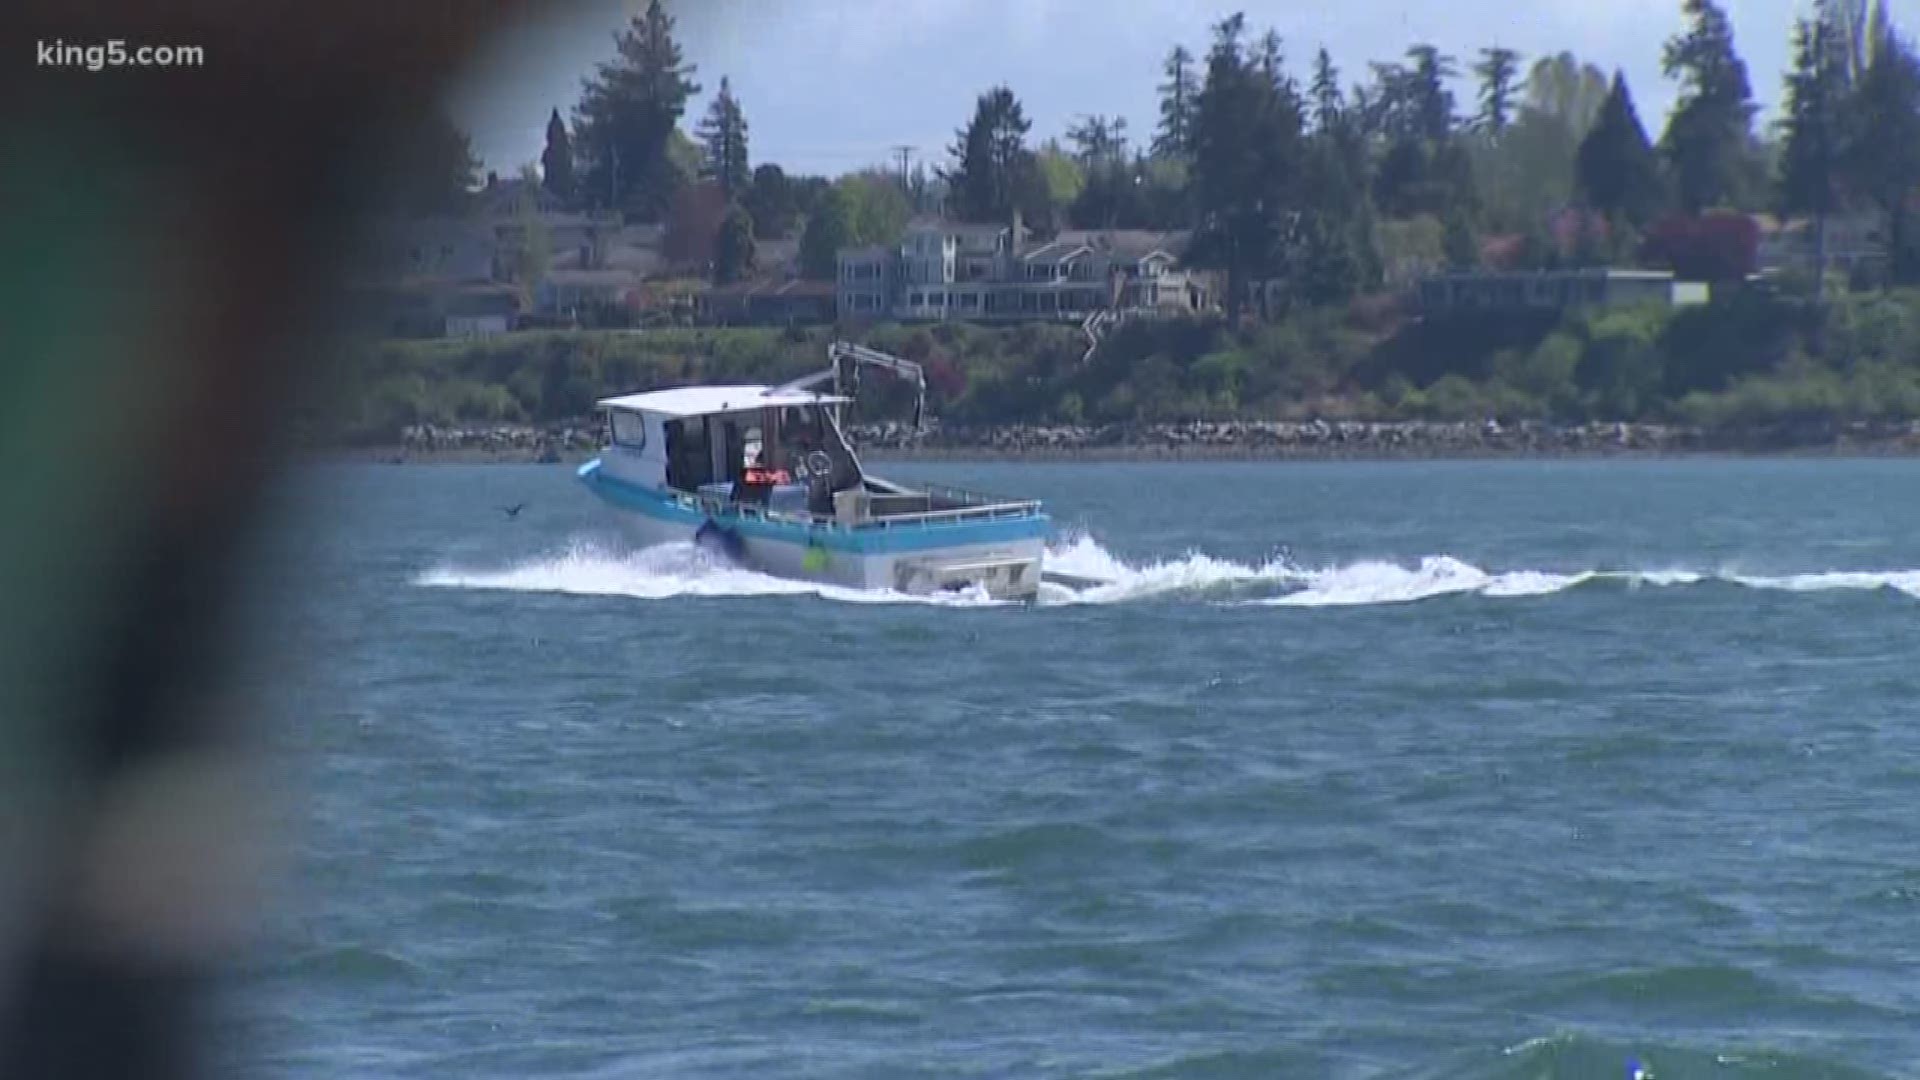 New rules are going into effect for boaters who encounter the Southern Resident killer whales. Those rules are meant to reduce noise so the orcas can find food, and protect them from possible boat strikes. KING 5 Environmental Reporter Alison Morrow reports.